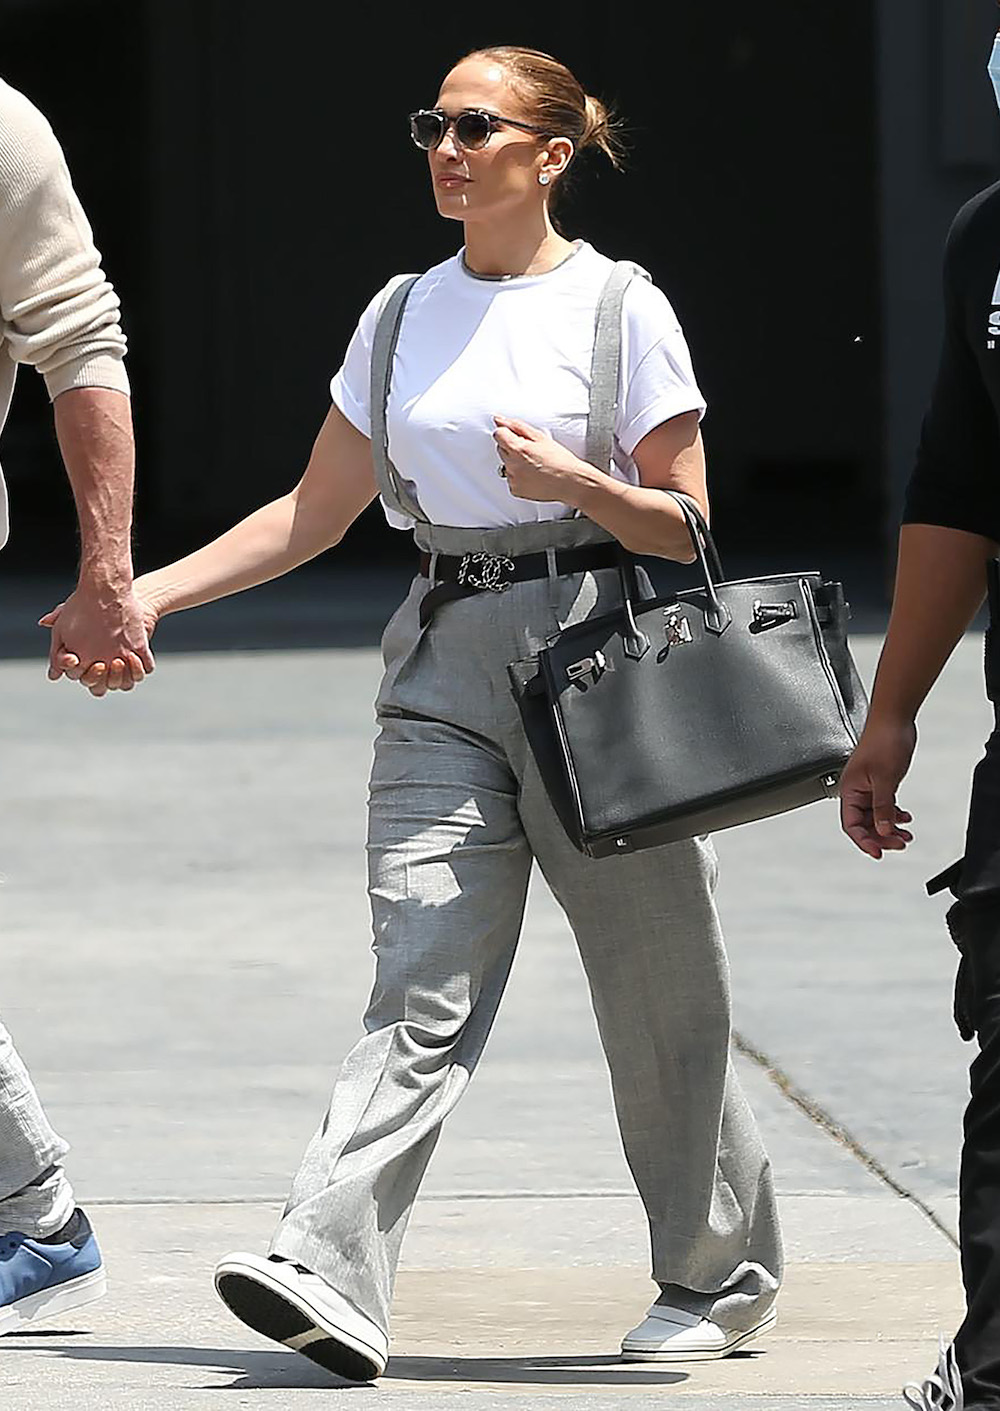 LOS ANGELES CA - MAY 3: Jennifer Lopez is seen on May 3, 2022 in Los Angeles, California. (Photo by MEGA/GC Images)